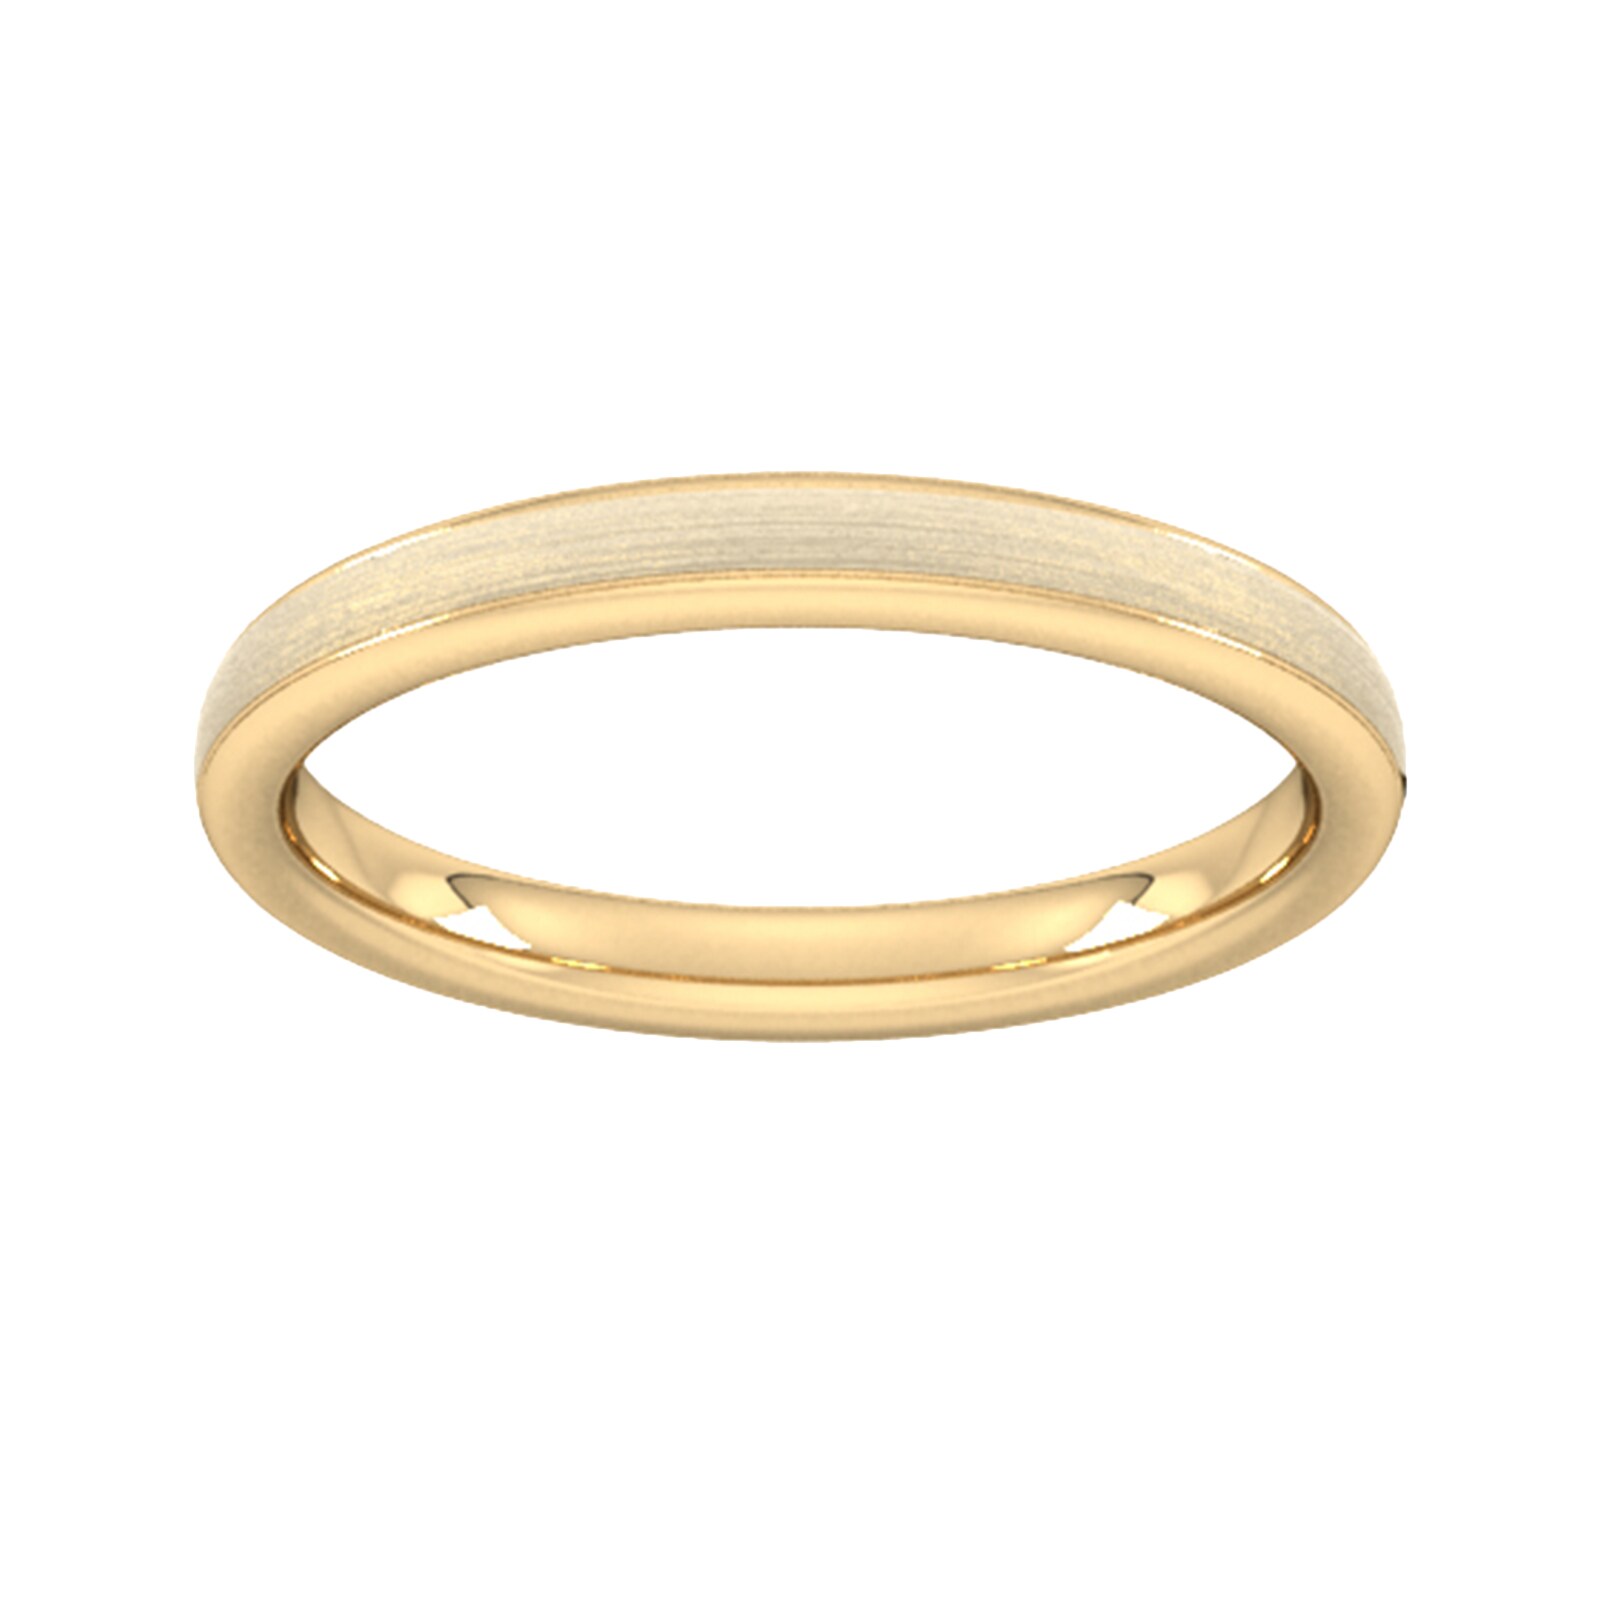 2.5mm D Shape Standard Matt Centre With Grooves Wedding Ring In 9 Carat Yellow Gold - Ring Size U